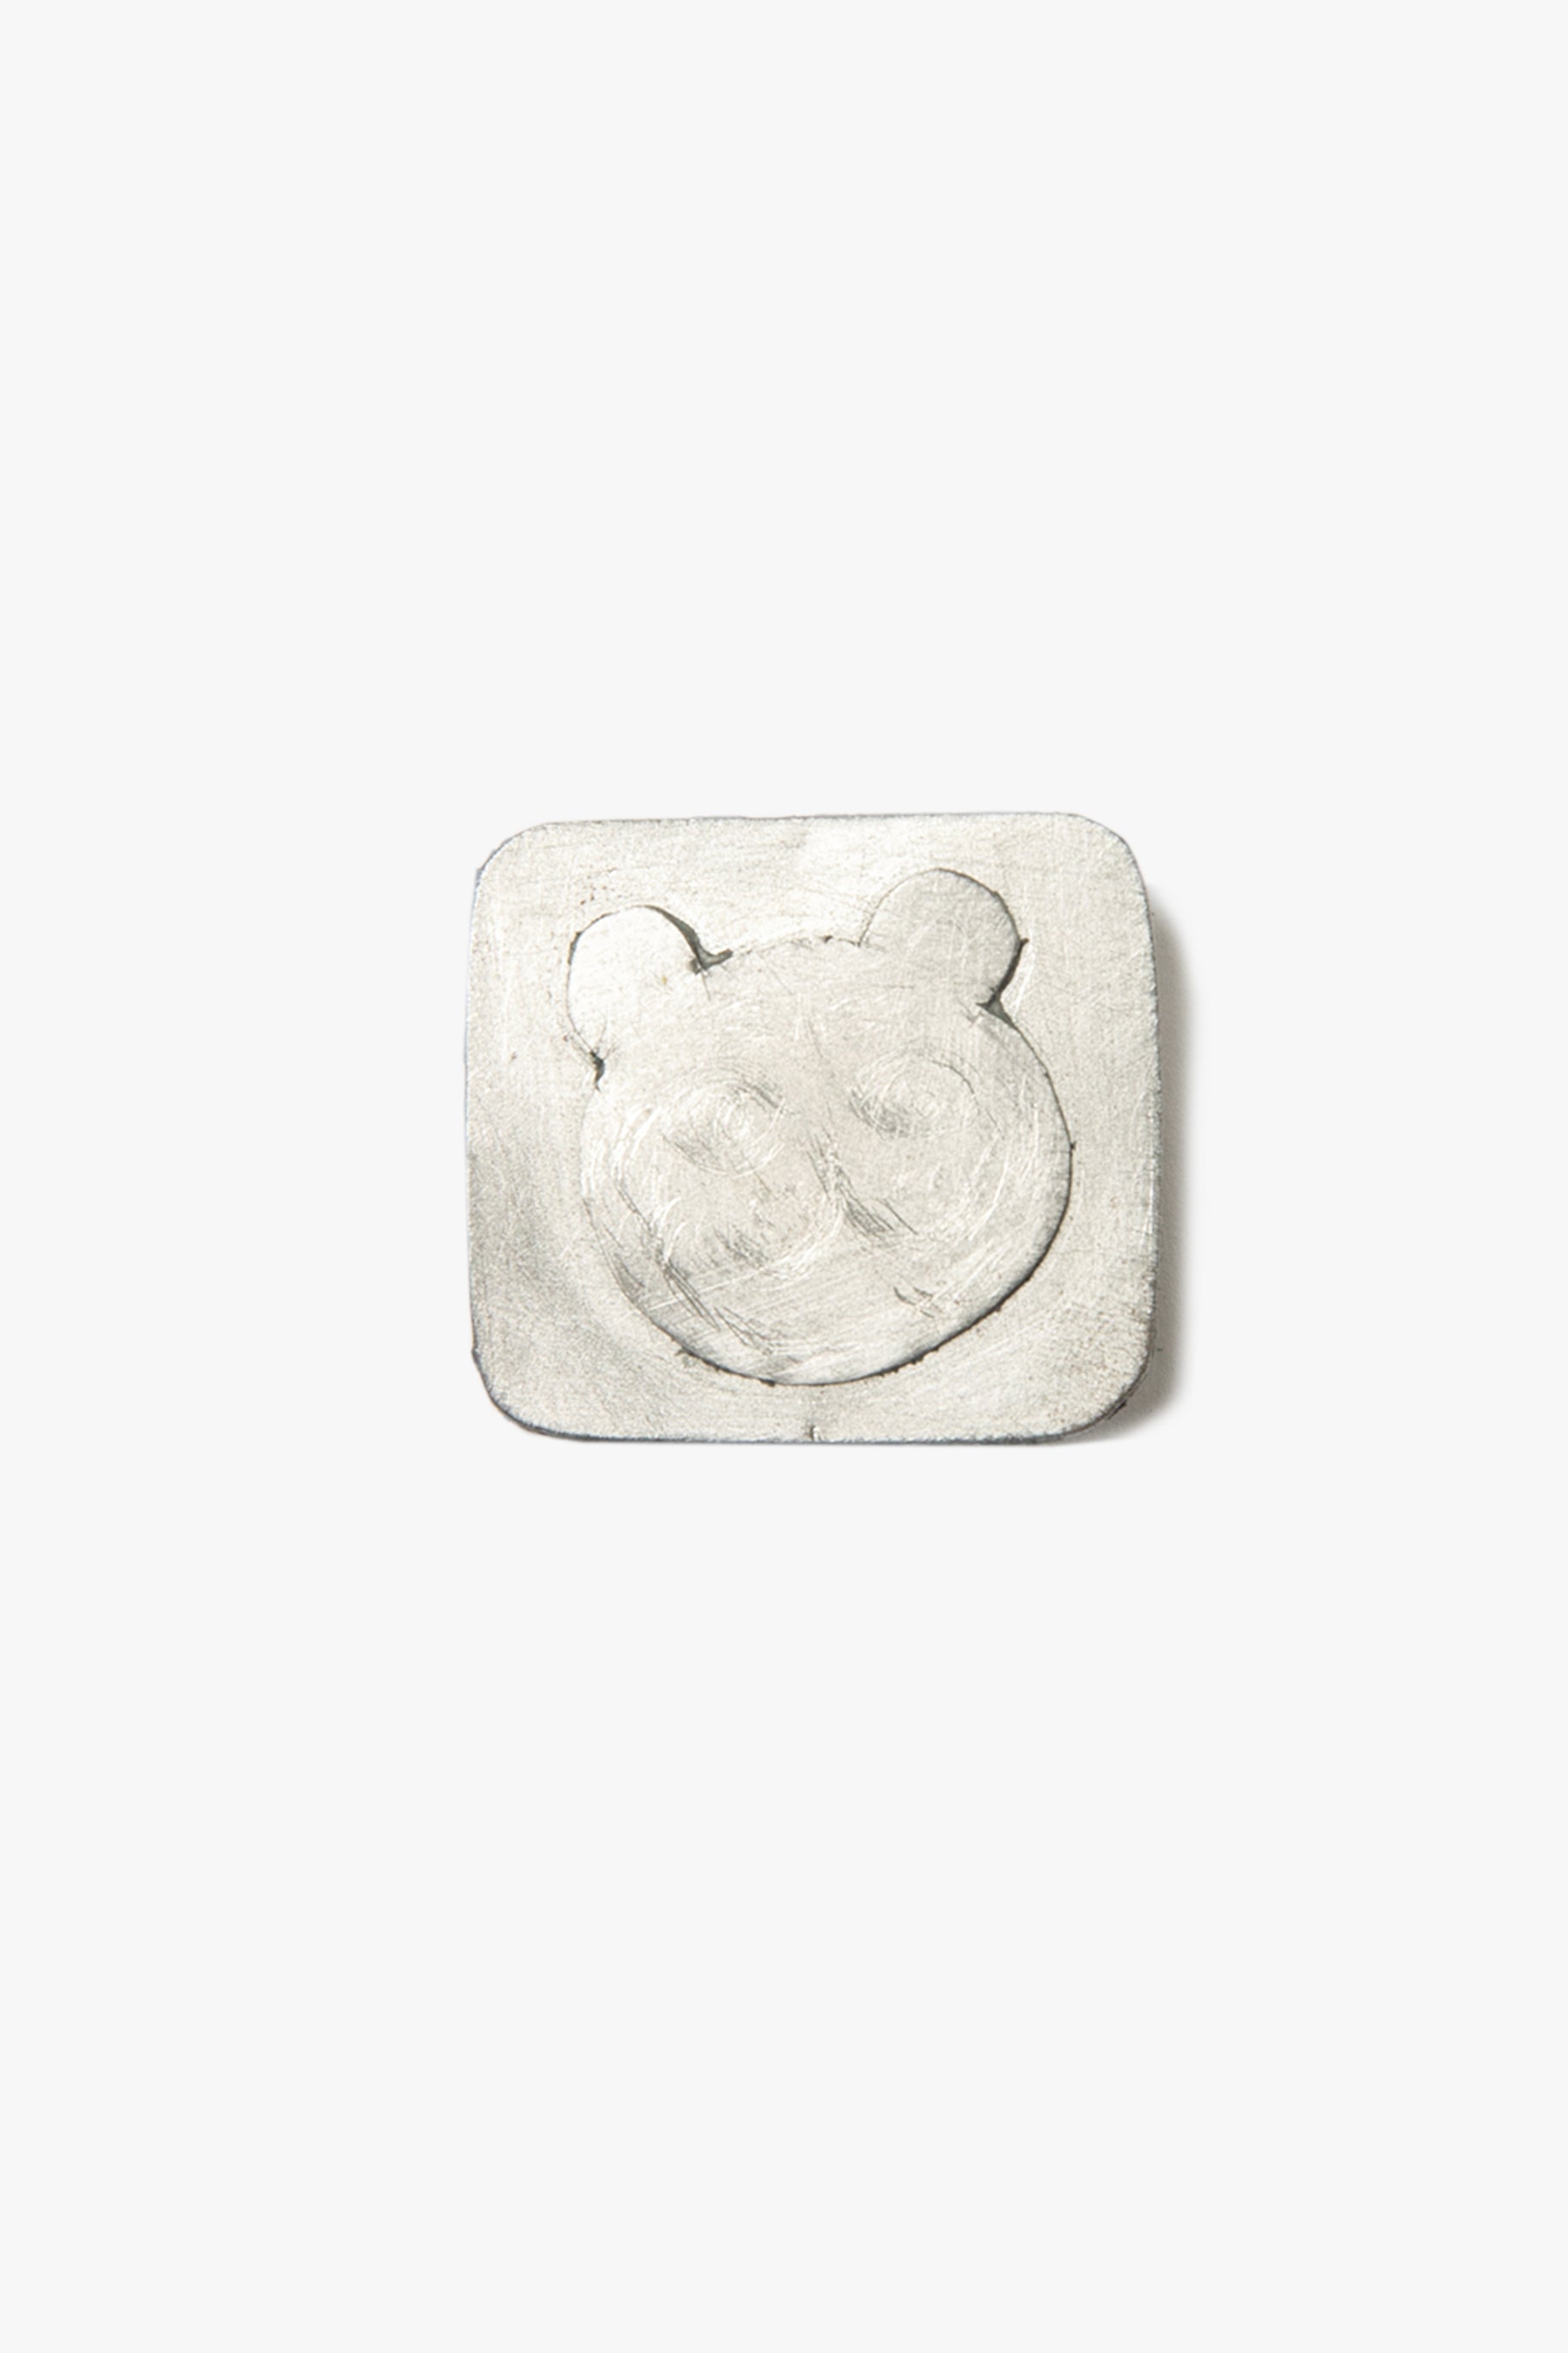 Cub Brooch from "Pictures at the Exhibition"